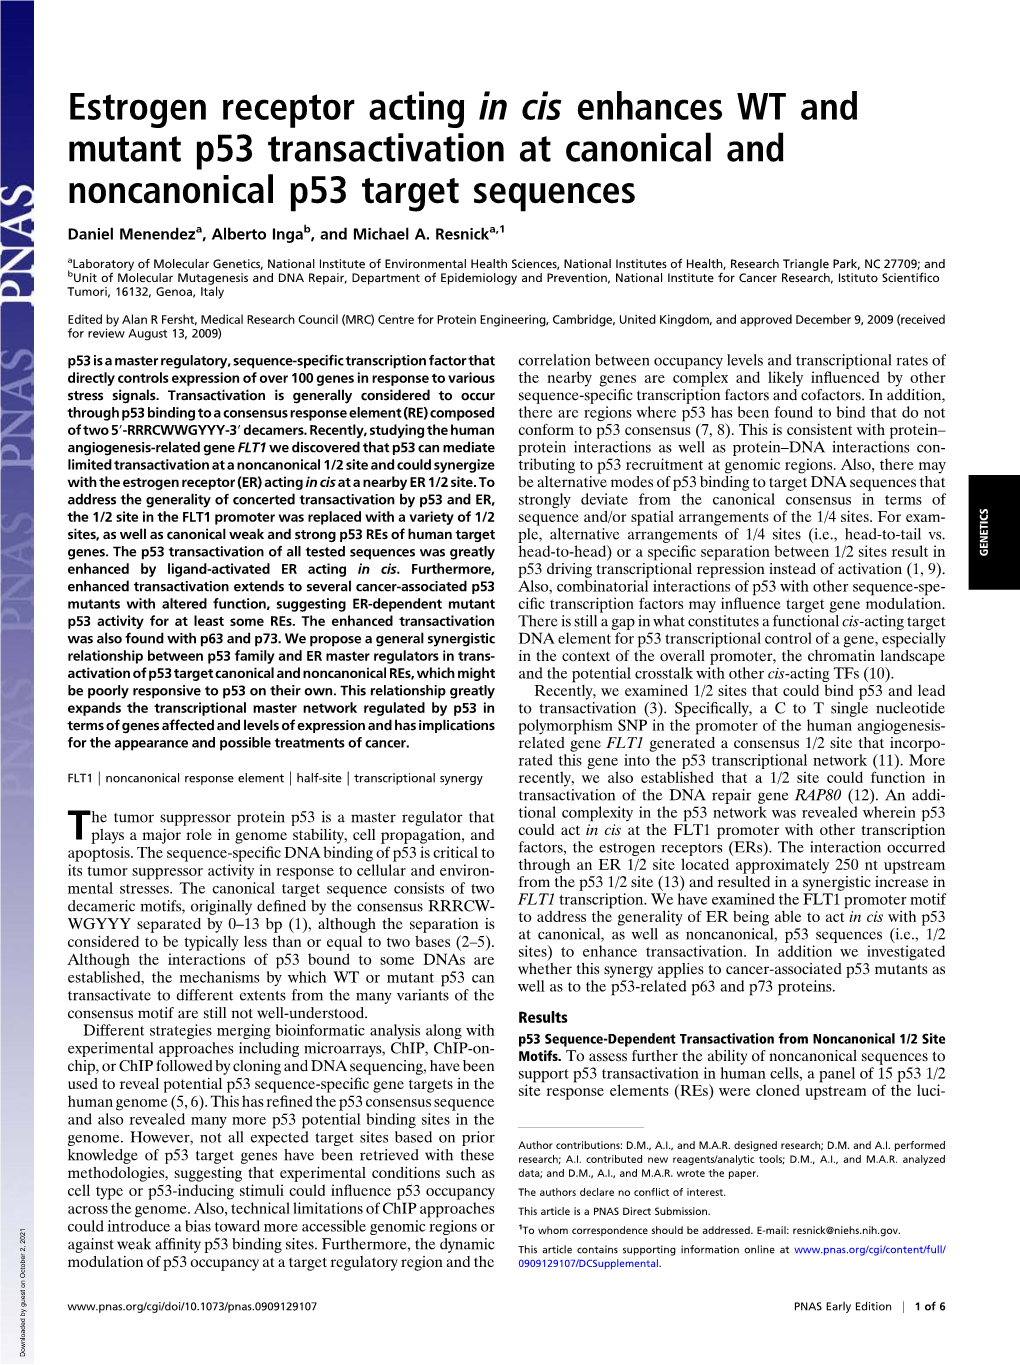 Estrogen Receptor Acting in Cis Enhances WT and Mutant P53 Transactivation at Canonical and Noncanonical P53 Target Sequences